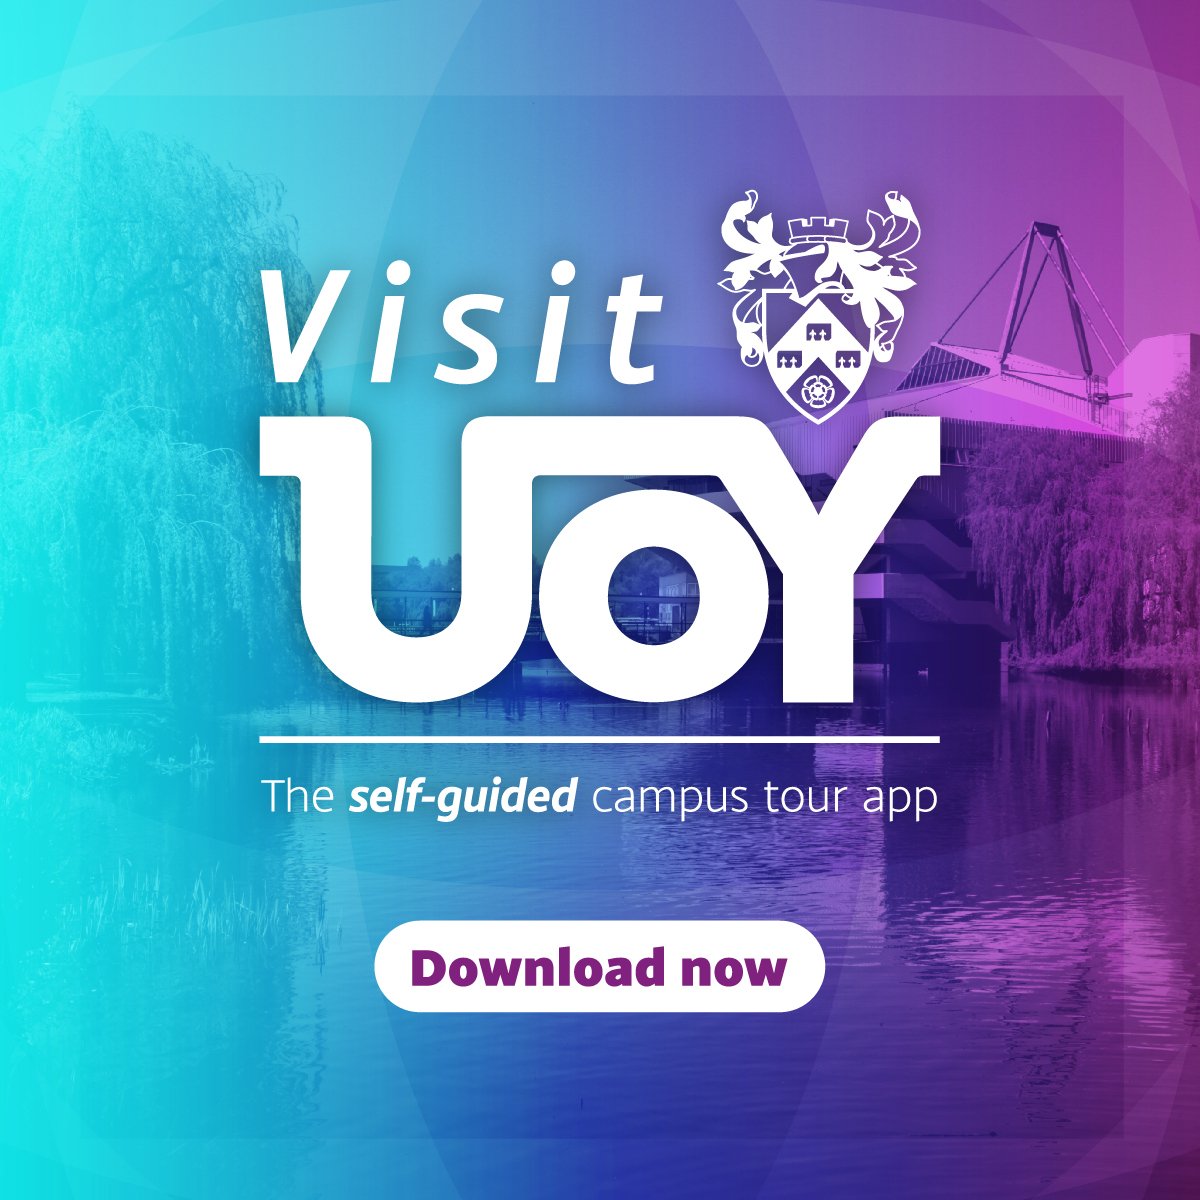 Want to come and visit us? Now you can, either virtually our in real life, using our new app. Search 'Visit UoY' on the App Store or Play Store.

#studyarchaeology #studyatyork @UniOfYork